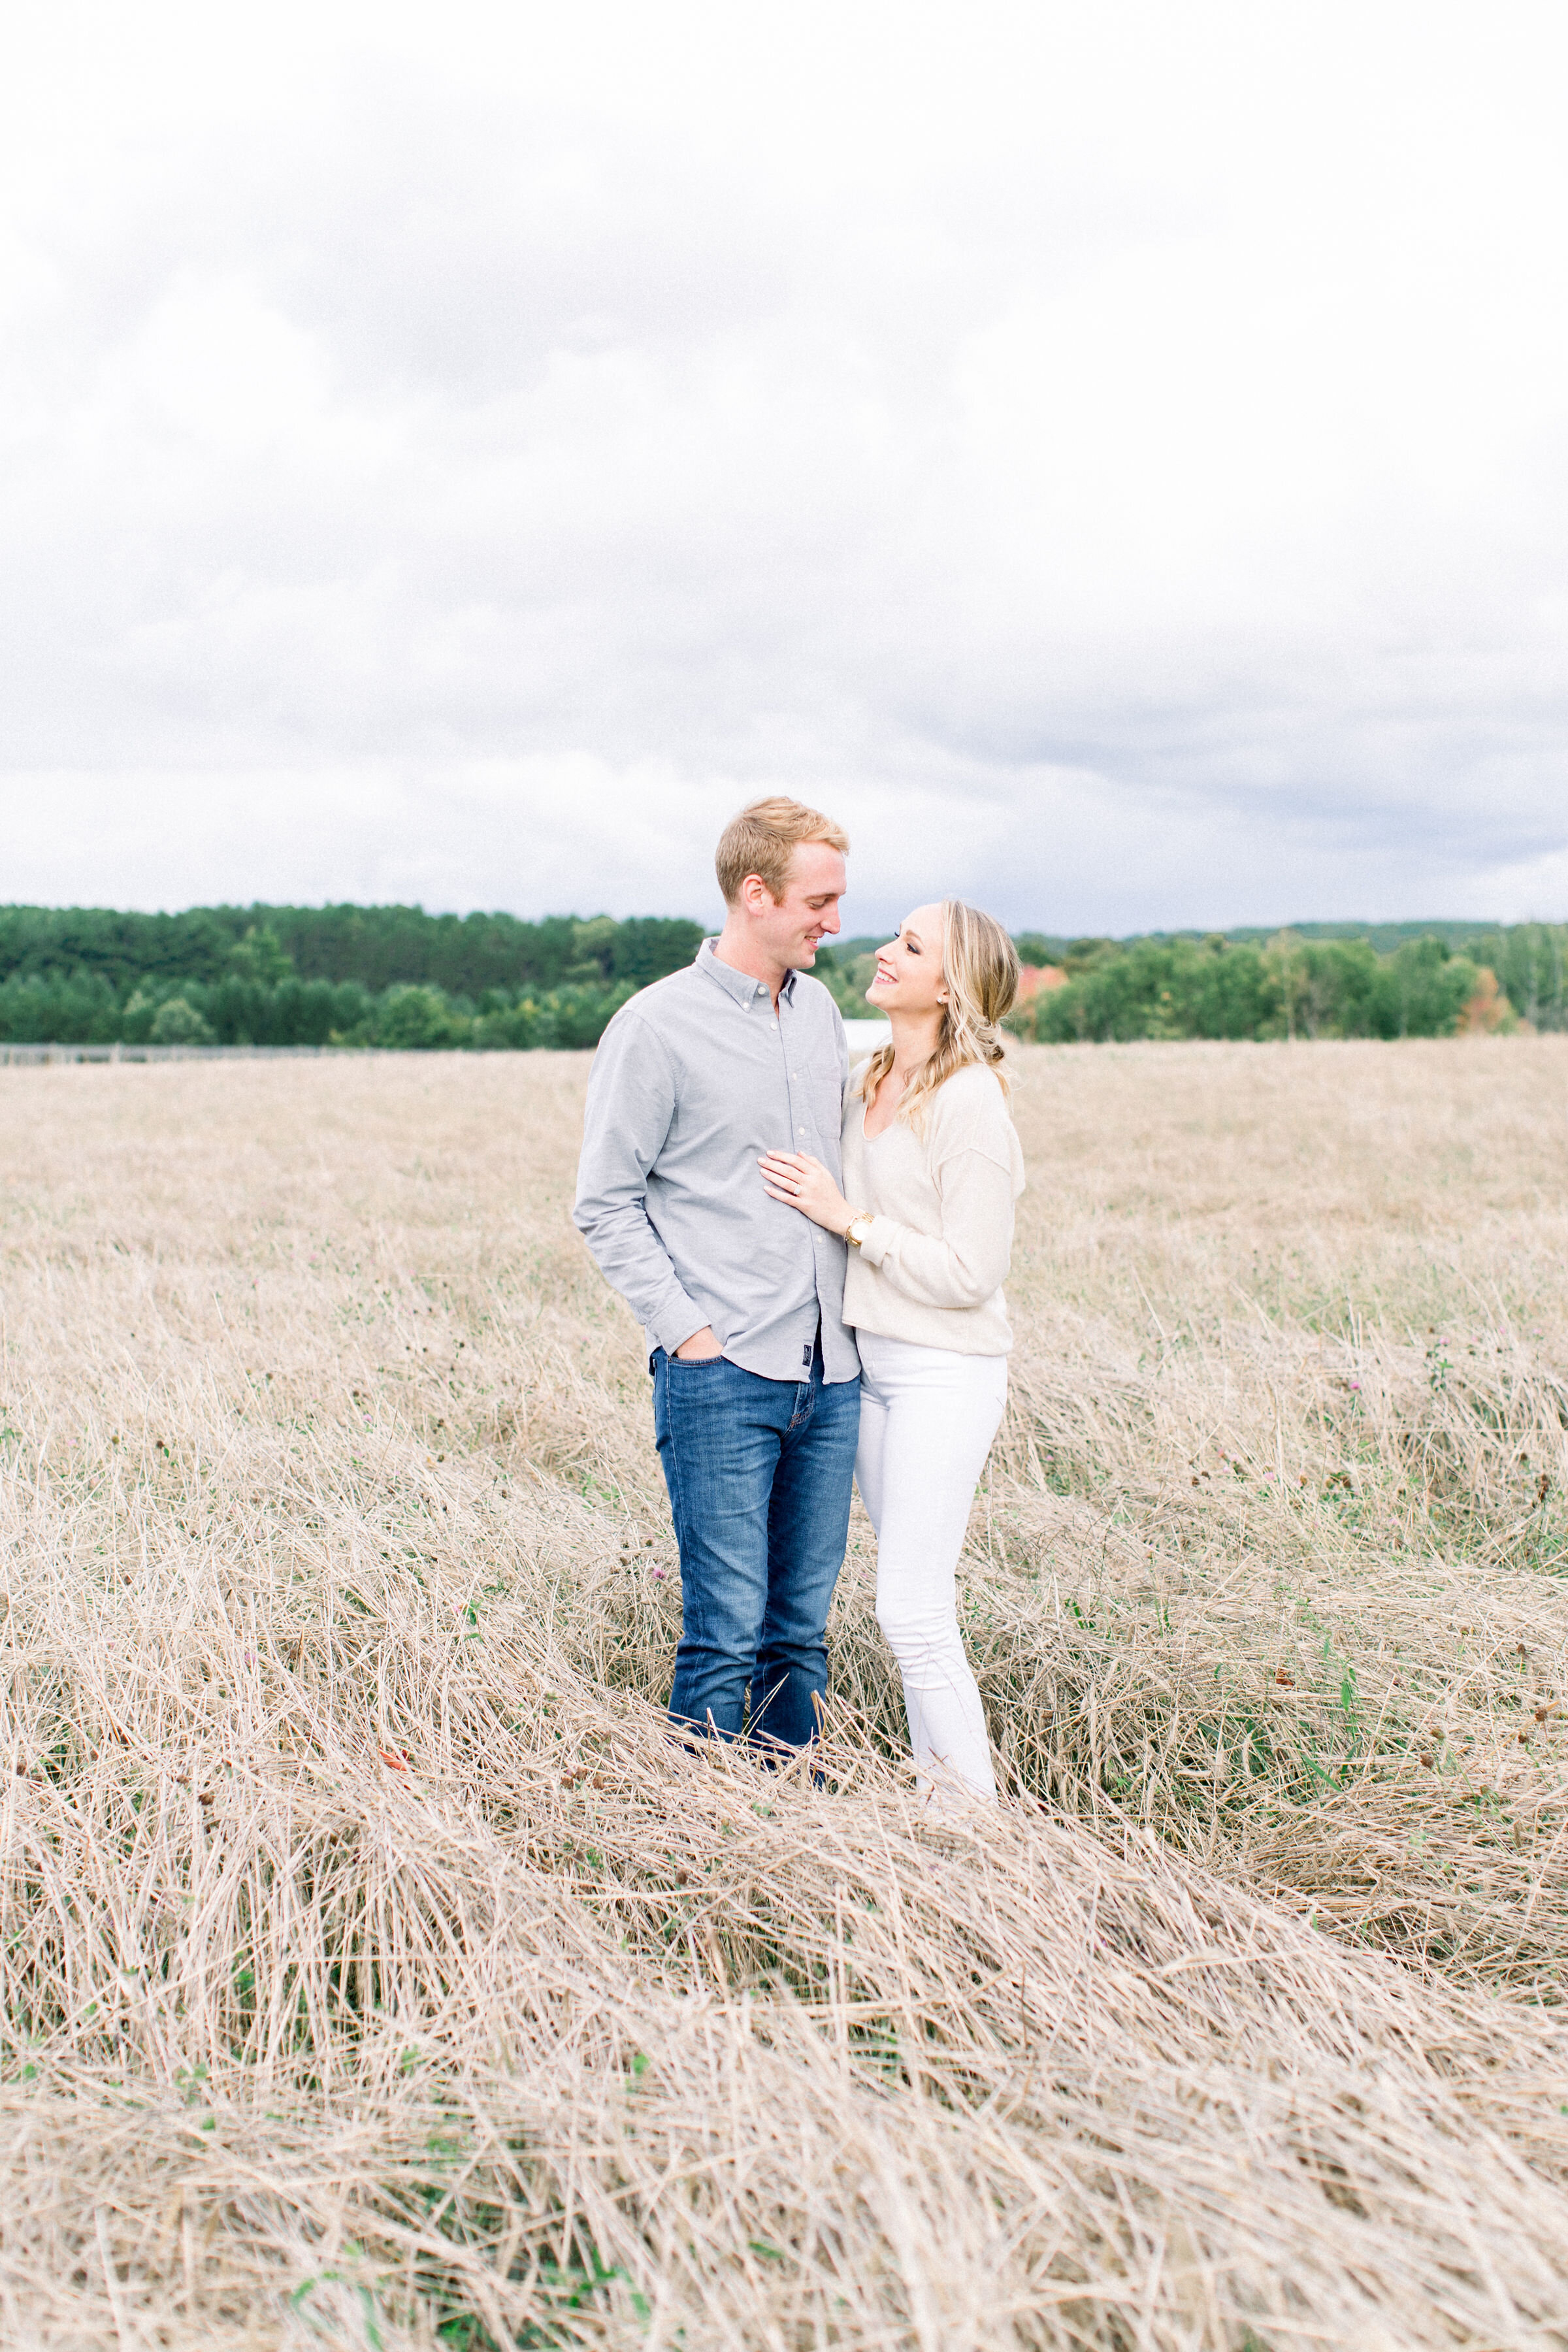 Molly+Connor+Engaged-6.jpg